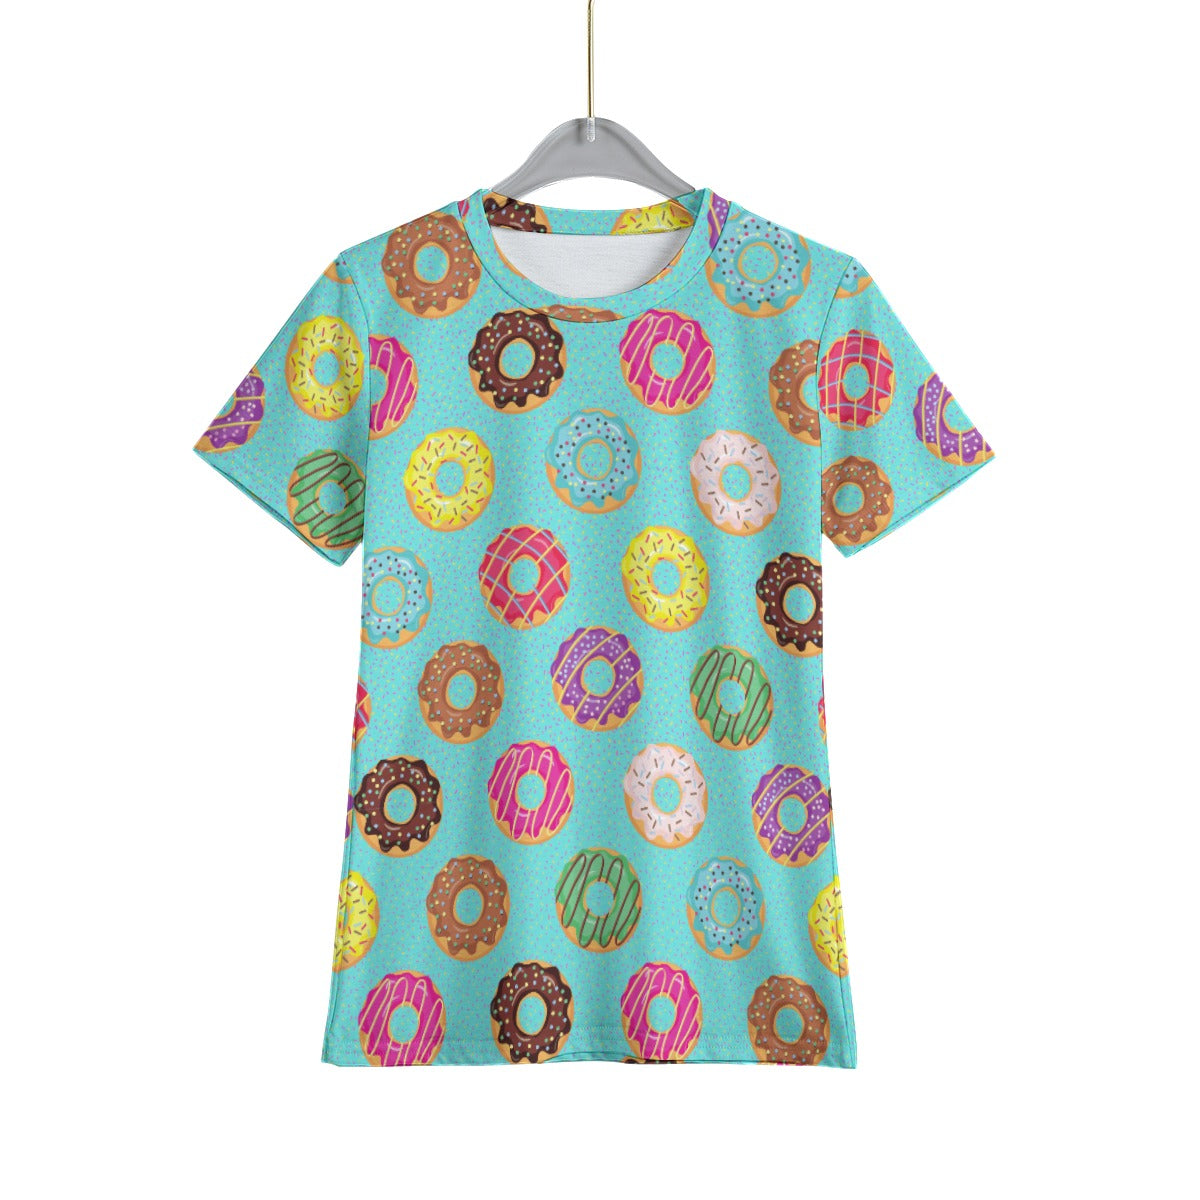 Donut Worry 'Bout It Kid's T-Shirt